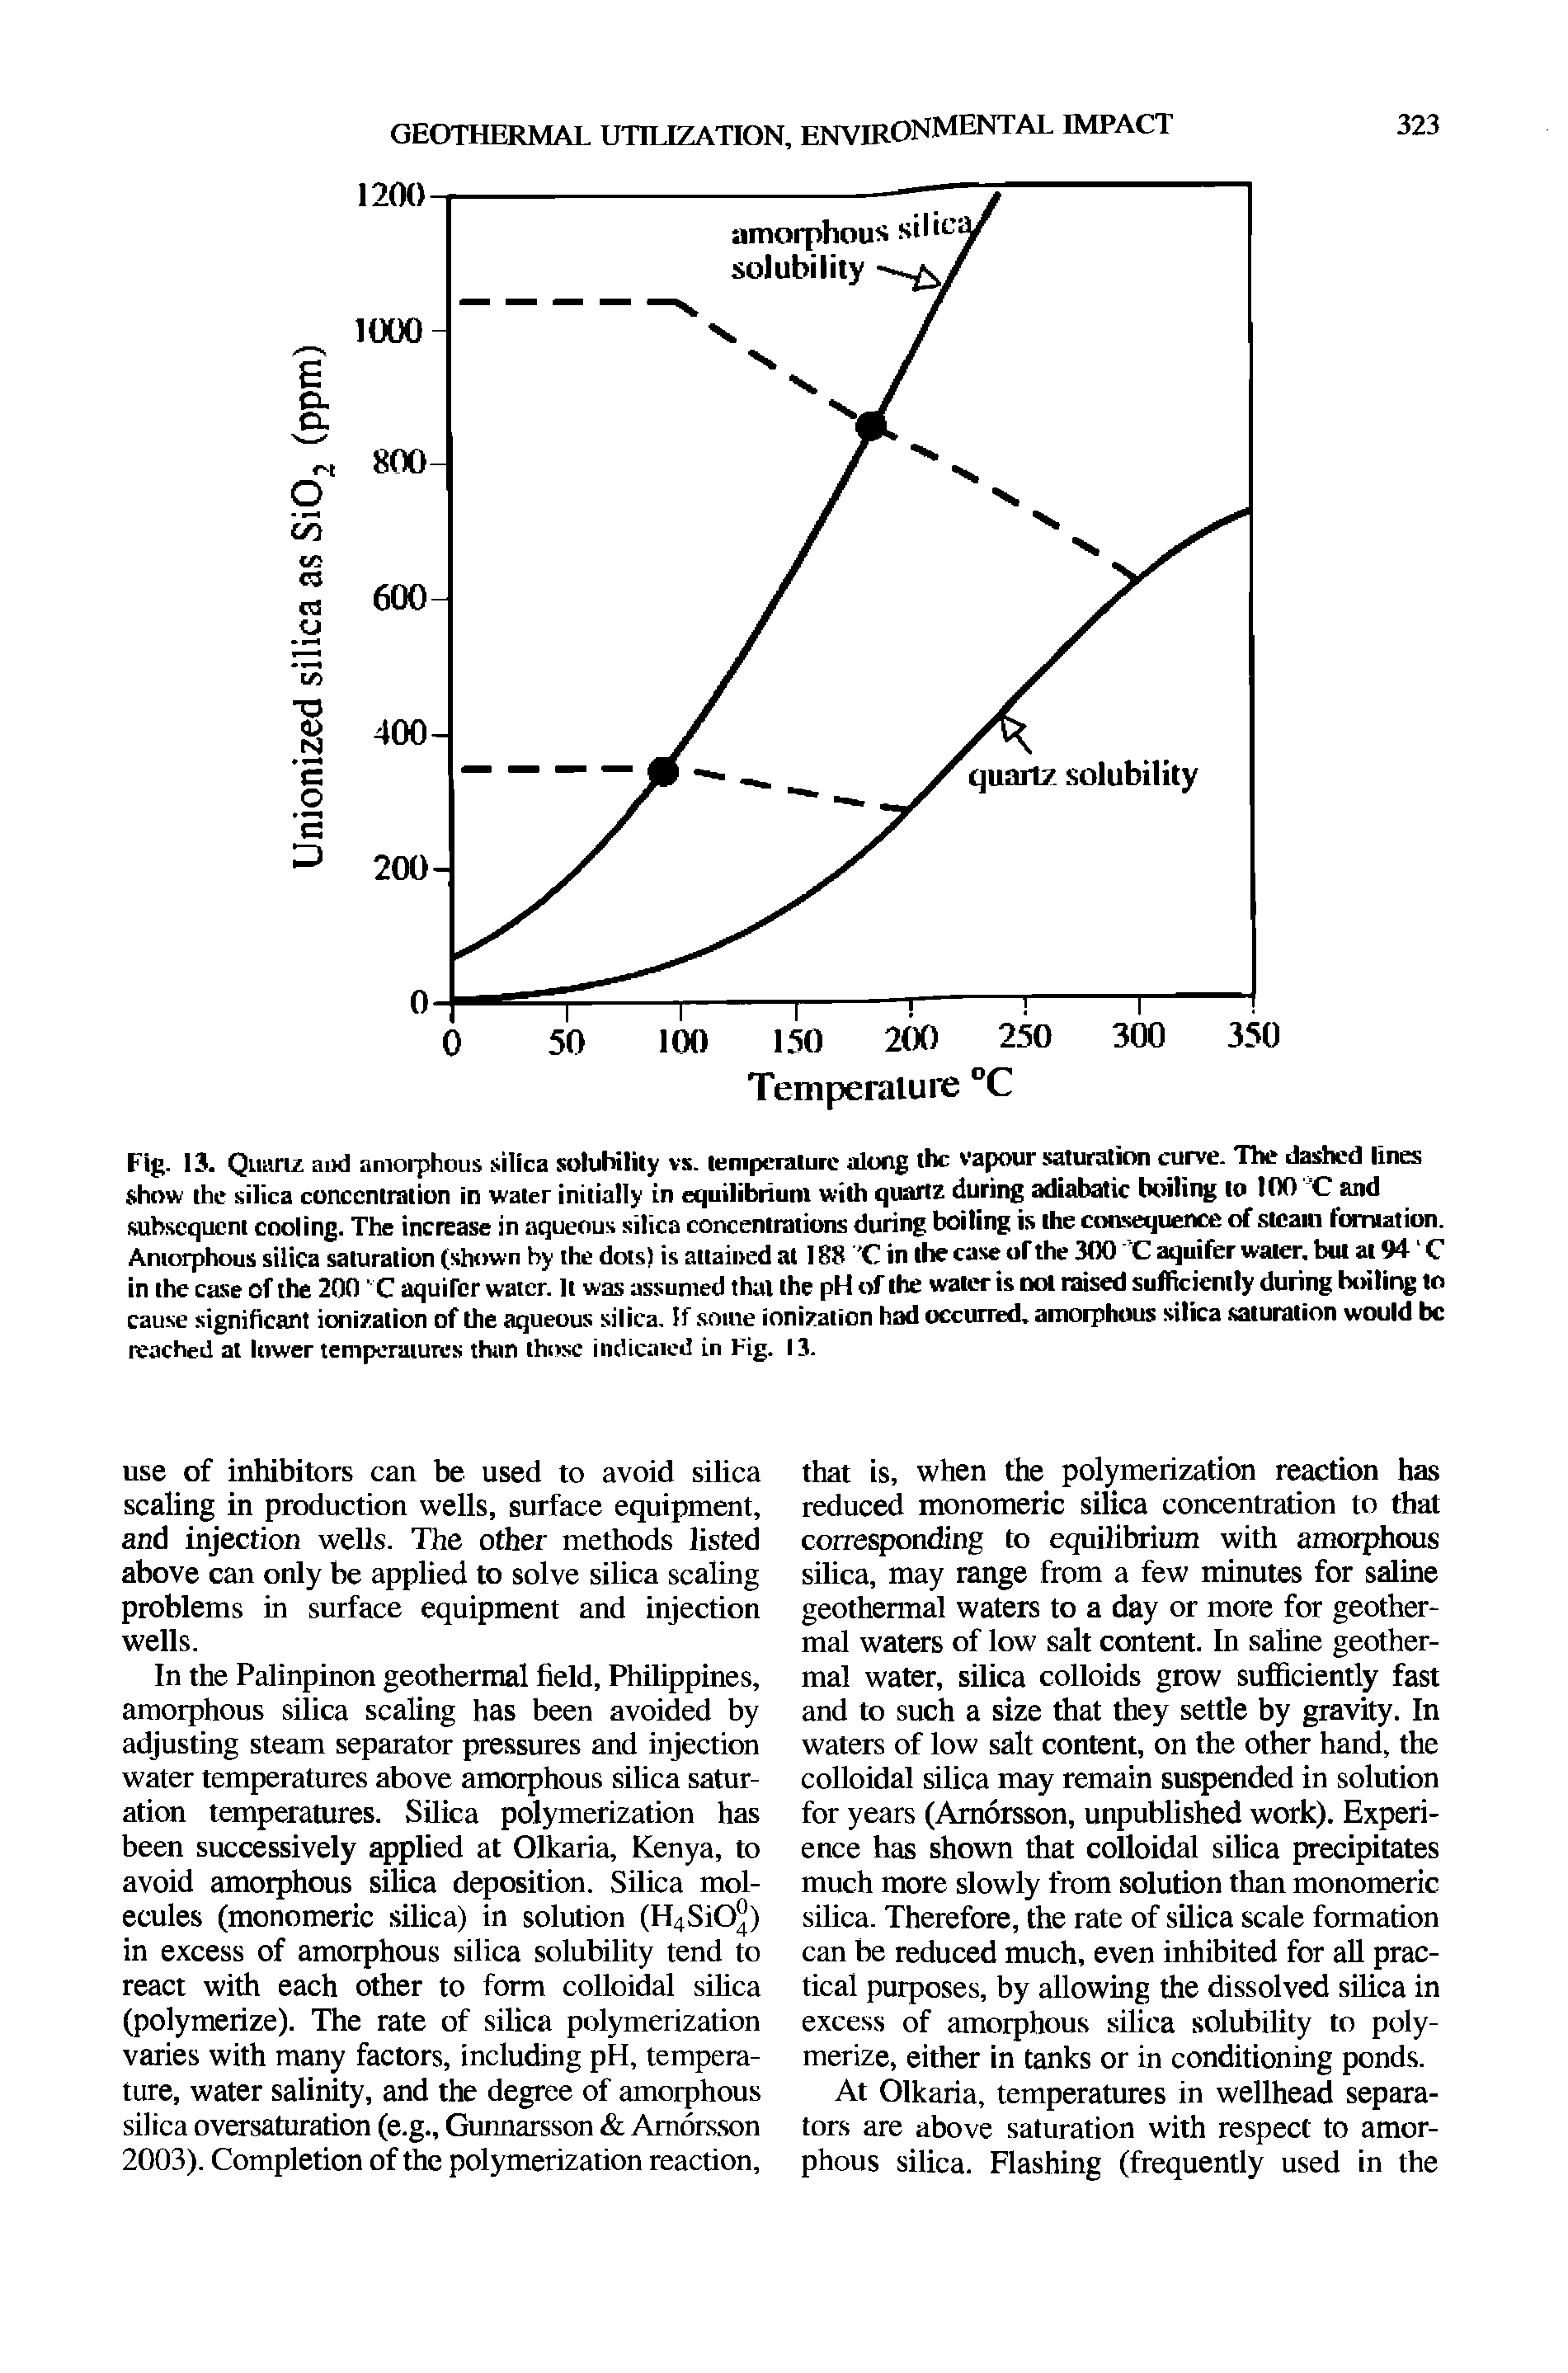 Fig. 13. Quartz ai>d amorphous silica solubility vs. temperature along the vapour saturation curve. The dashed lines show the silica concentration in water initially in equilibrium with quartz during adiabatic boiling to 100 C and subsequent cooling. The increase in aqueous silica concentrations during boiling is the consequence of steam formation. Amorphous silica saturation (shown by the dots) is attained at 188 C in the case of the 300 C aquifer water, but at 94 C in the case of the 200 C aquircr water. It was assumed that the pH of the water is not raised sufficiently during boiling to cause significant ionization of the aqueous silica. If some ionization had occurred, amorphous silica saturation would be reached at lower temperatures than those indicated in Fig. 13.